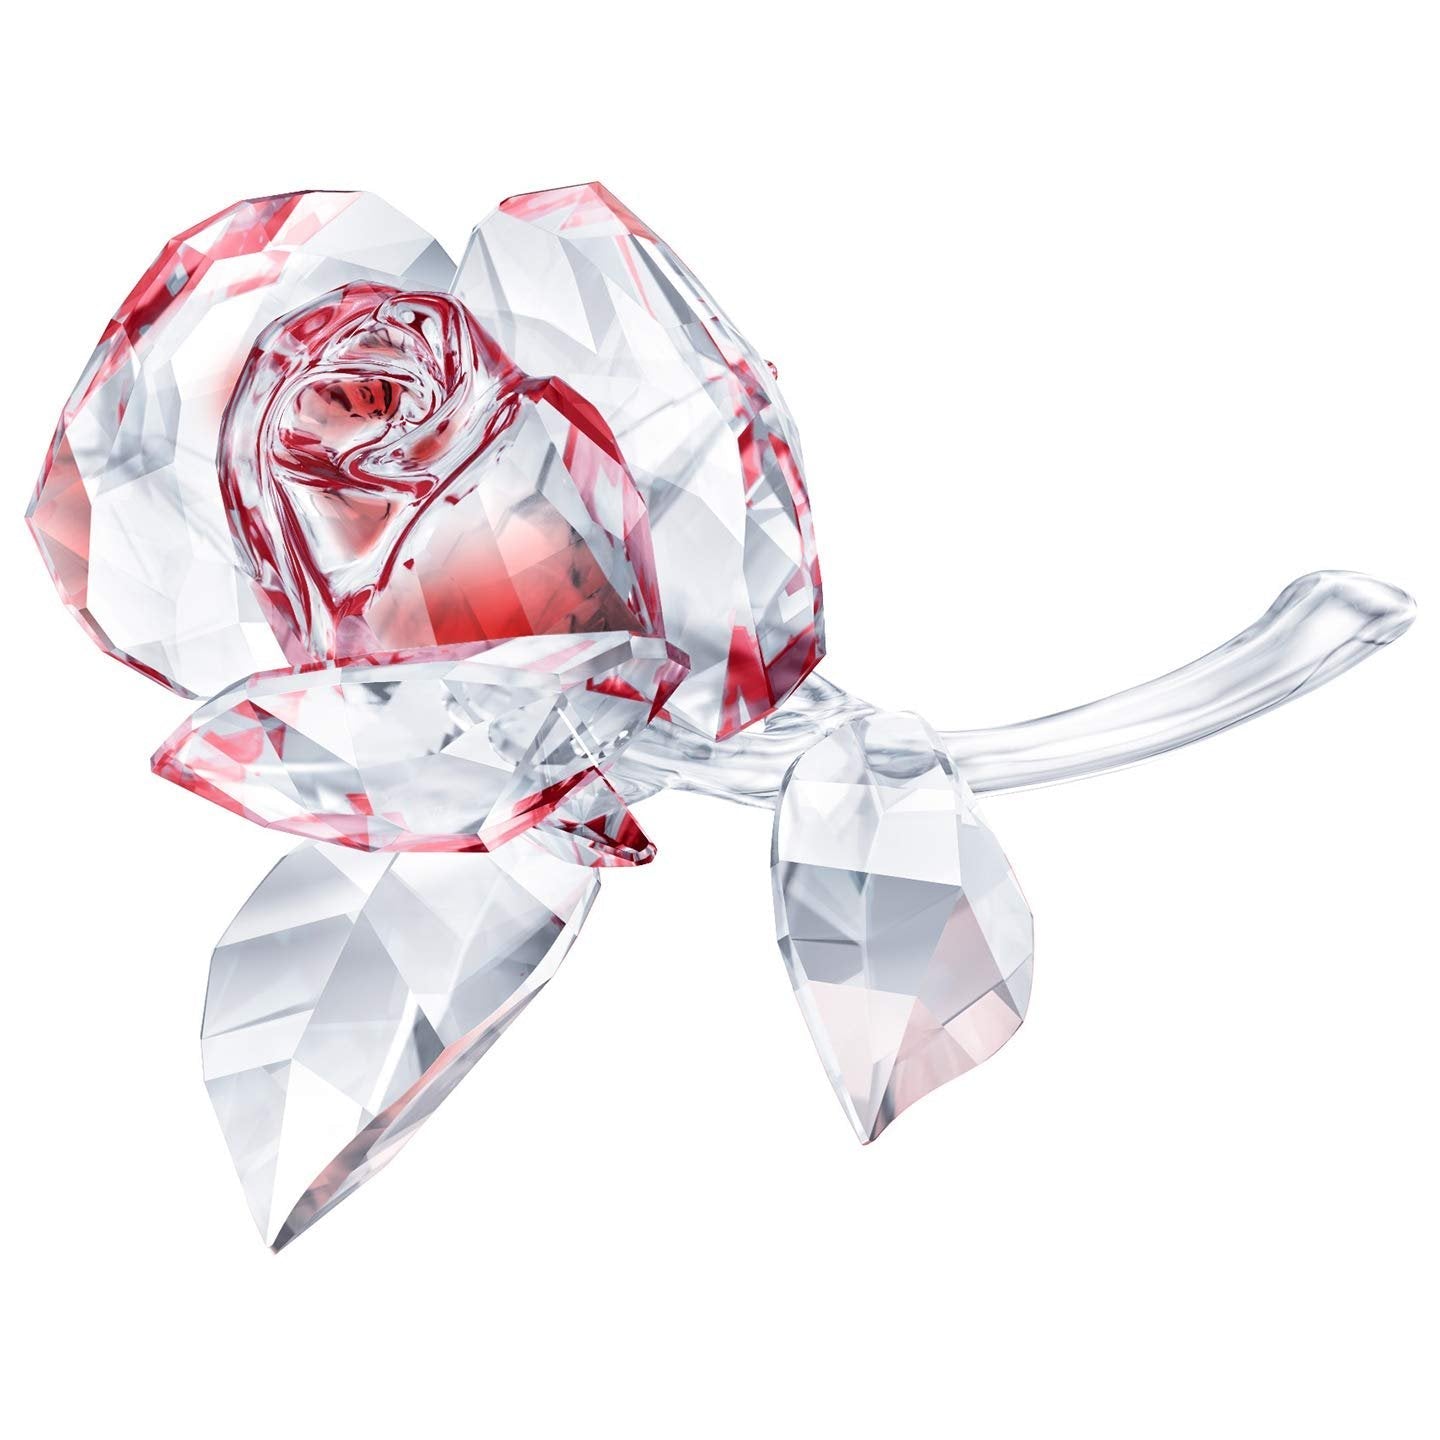 Family Gifts Swarovki Crystal Blossoming Rose. Red